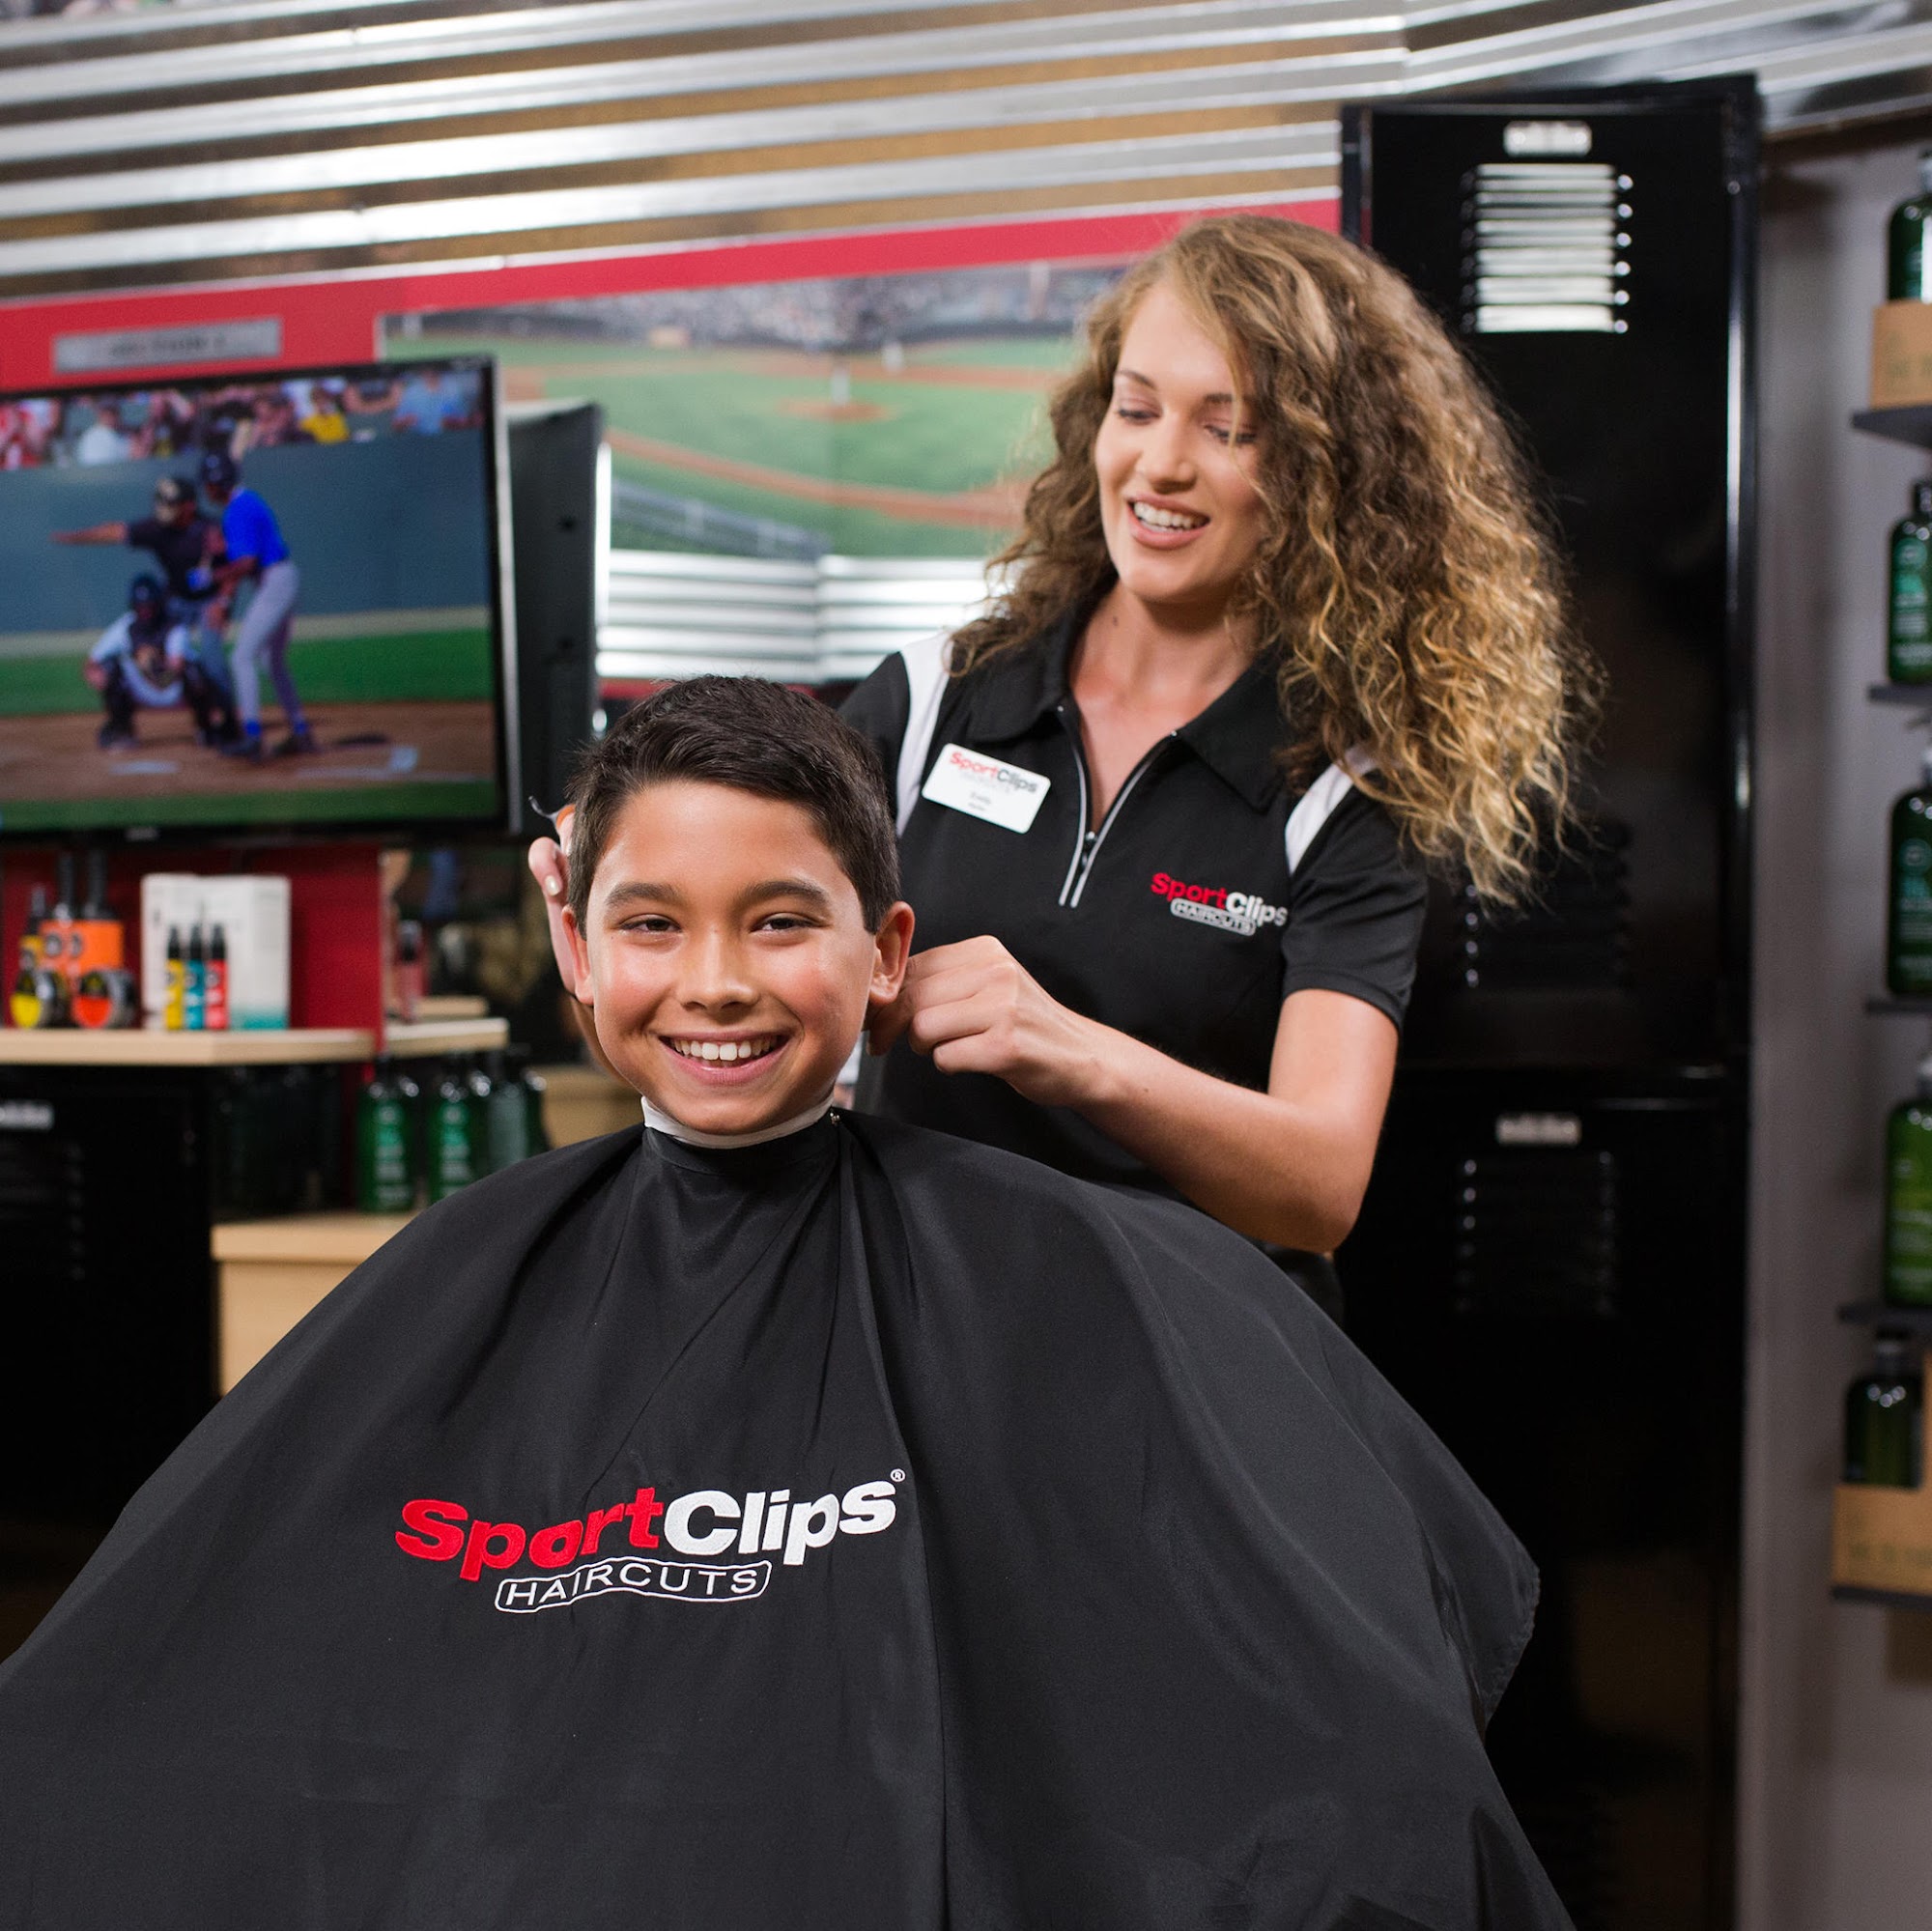 Sport Clips Haircuts of Sterling 4206 E Lincolnway, Sterling Illinois 61081